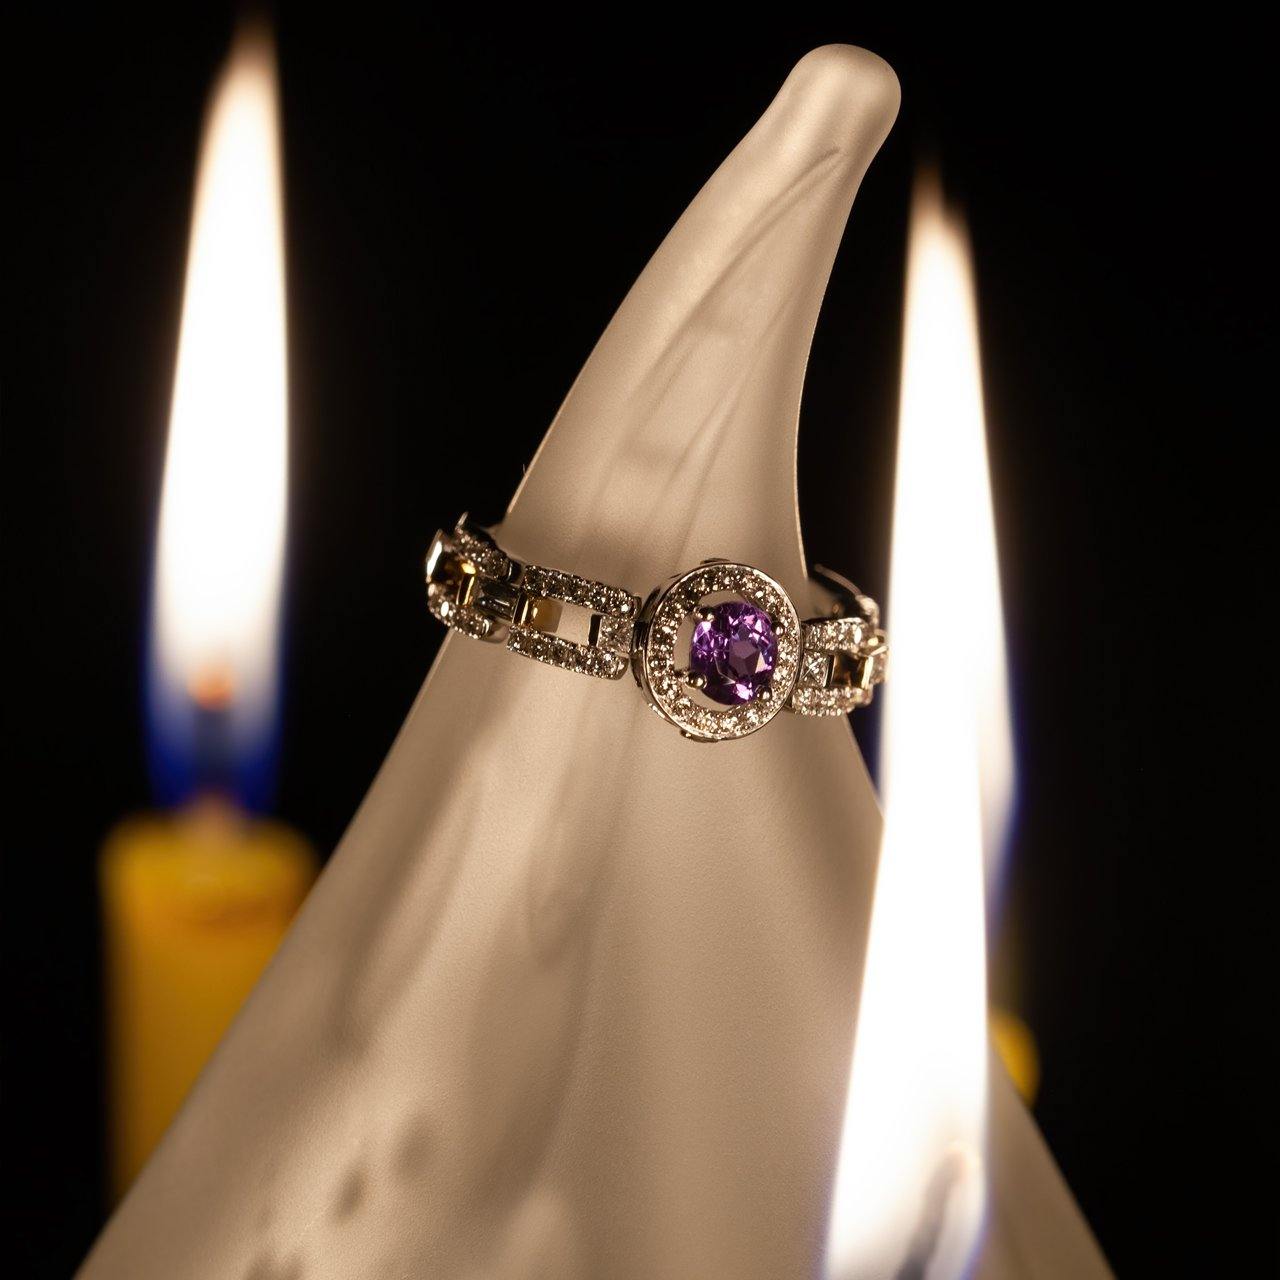 0.40ct alexandrite stone set in an 18k multitone gold ring, displayed on a candle